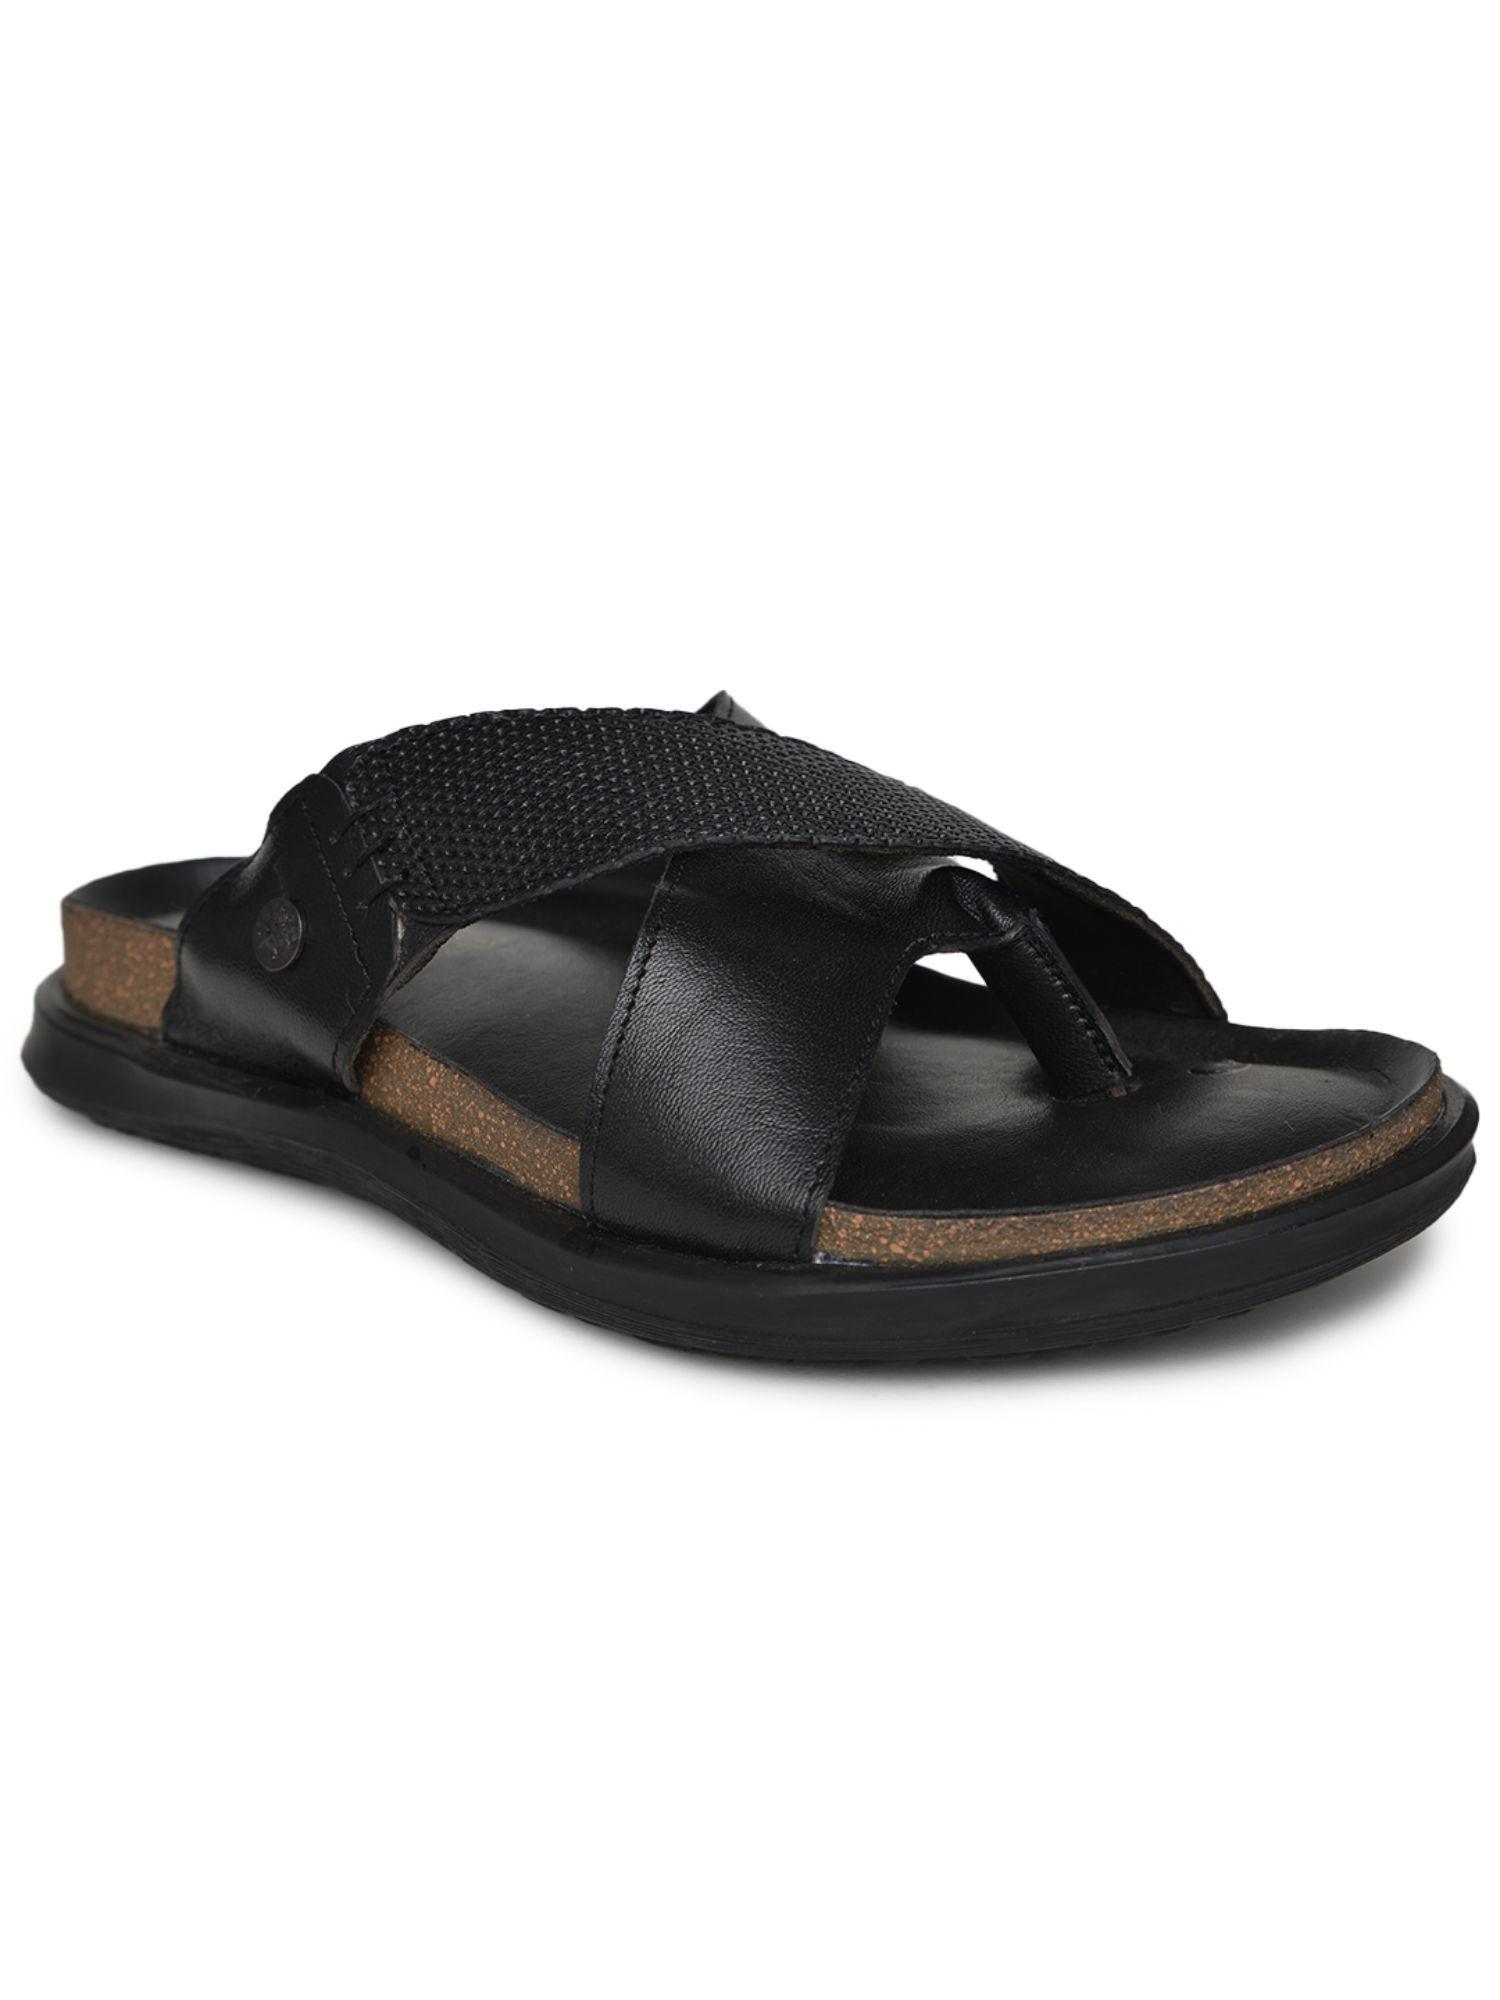 feest-genuine-leather-casual-sandals-for-mens